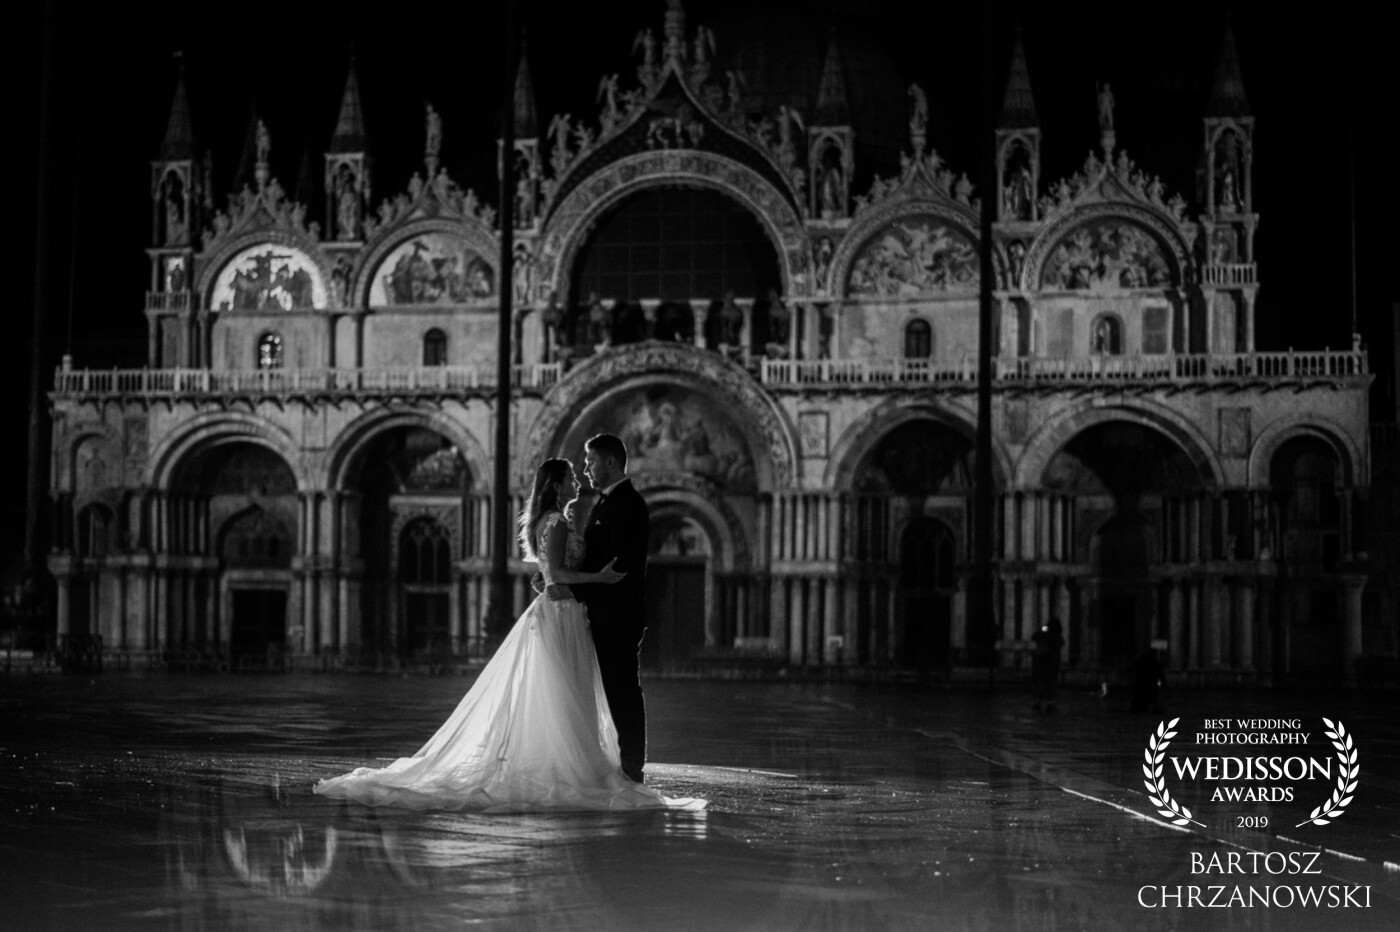 Because Venice is a city that lives non-stop, we decided to go for photos at night. There were very few tourists and we had the time and the opportunity to experiment with additional lighting. Two days later, a wave of water flooded Venice. We were lucky.<br />
